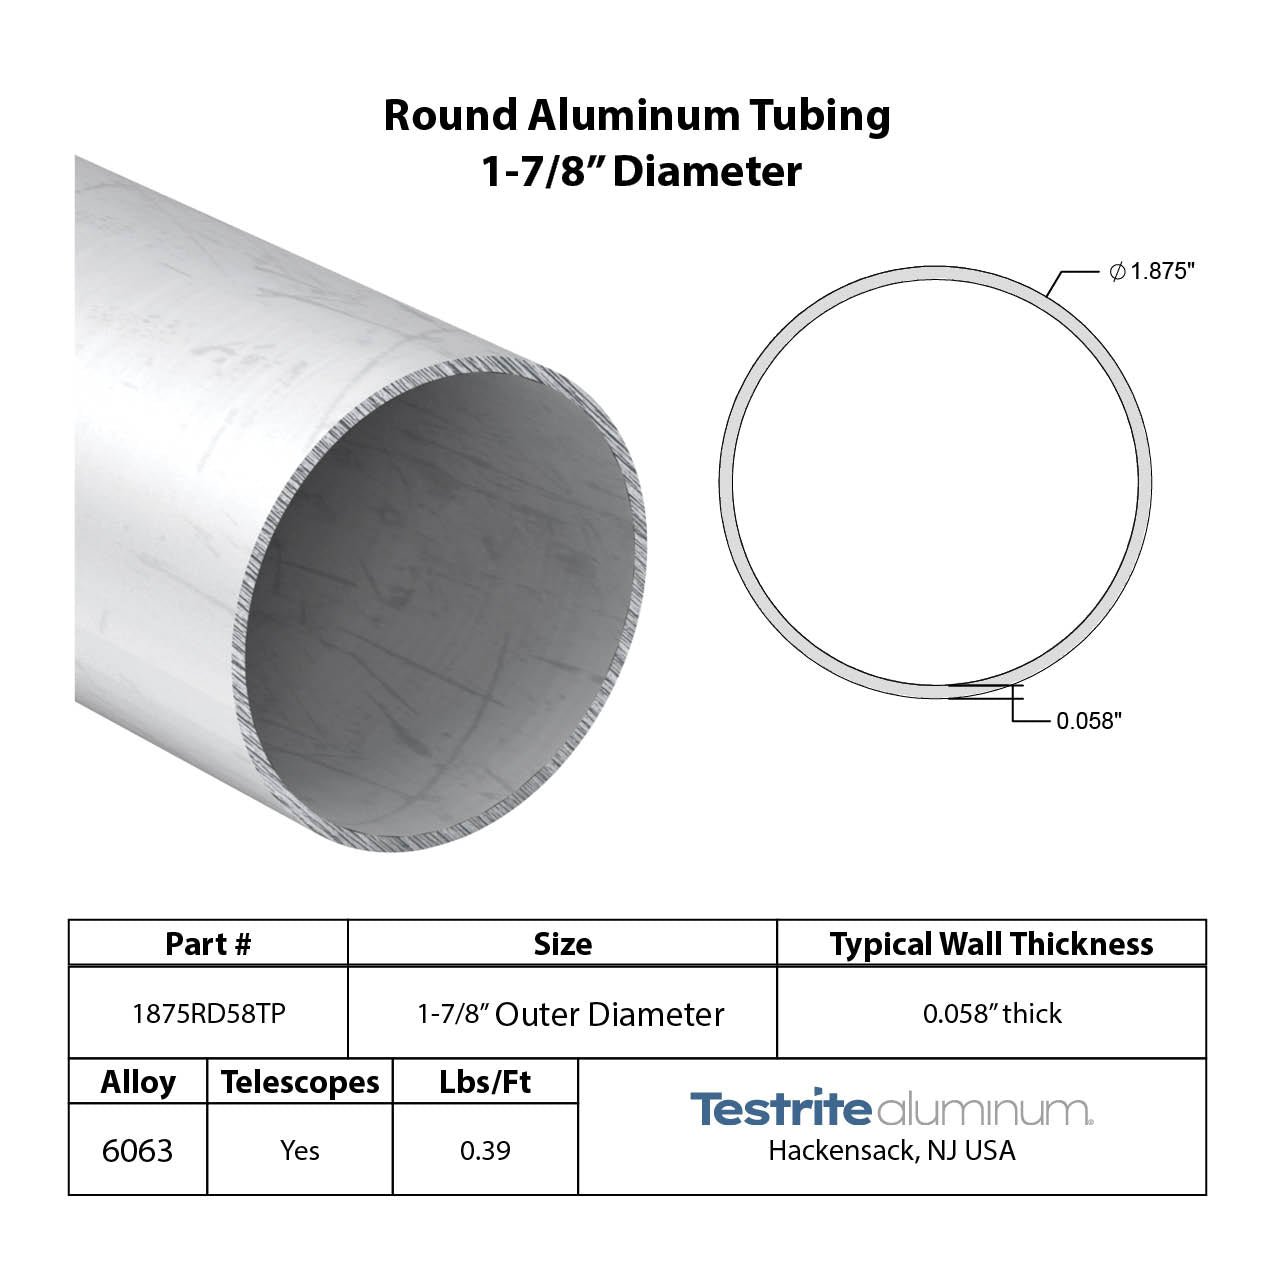 Specifications for 1-7/8" OD x .058" Wall Drawn Round Aluminum Tubing Telescopic, 1.875" OD x .058" wall round aluminum tube,designed to fit inside our 2" OD x .058" wall tube and to accept our 1-3/4" OD x .058" Wall tube inside of it, all telescoping compatible